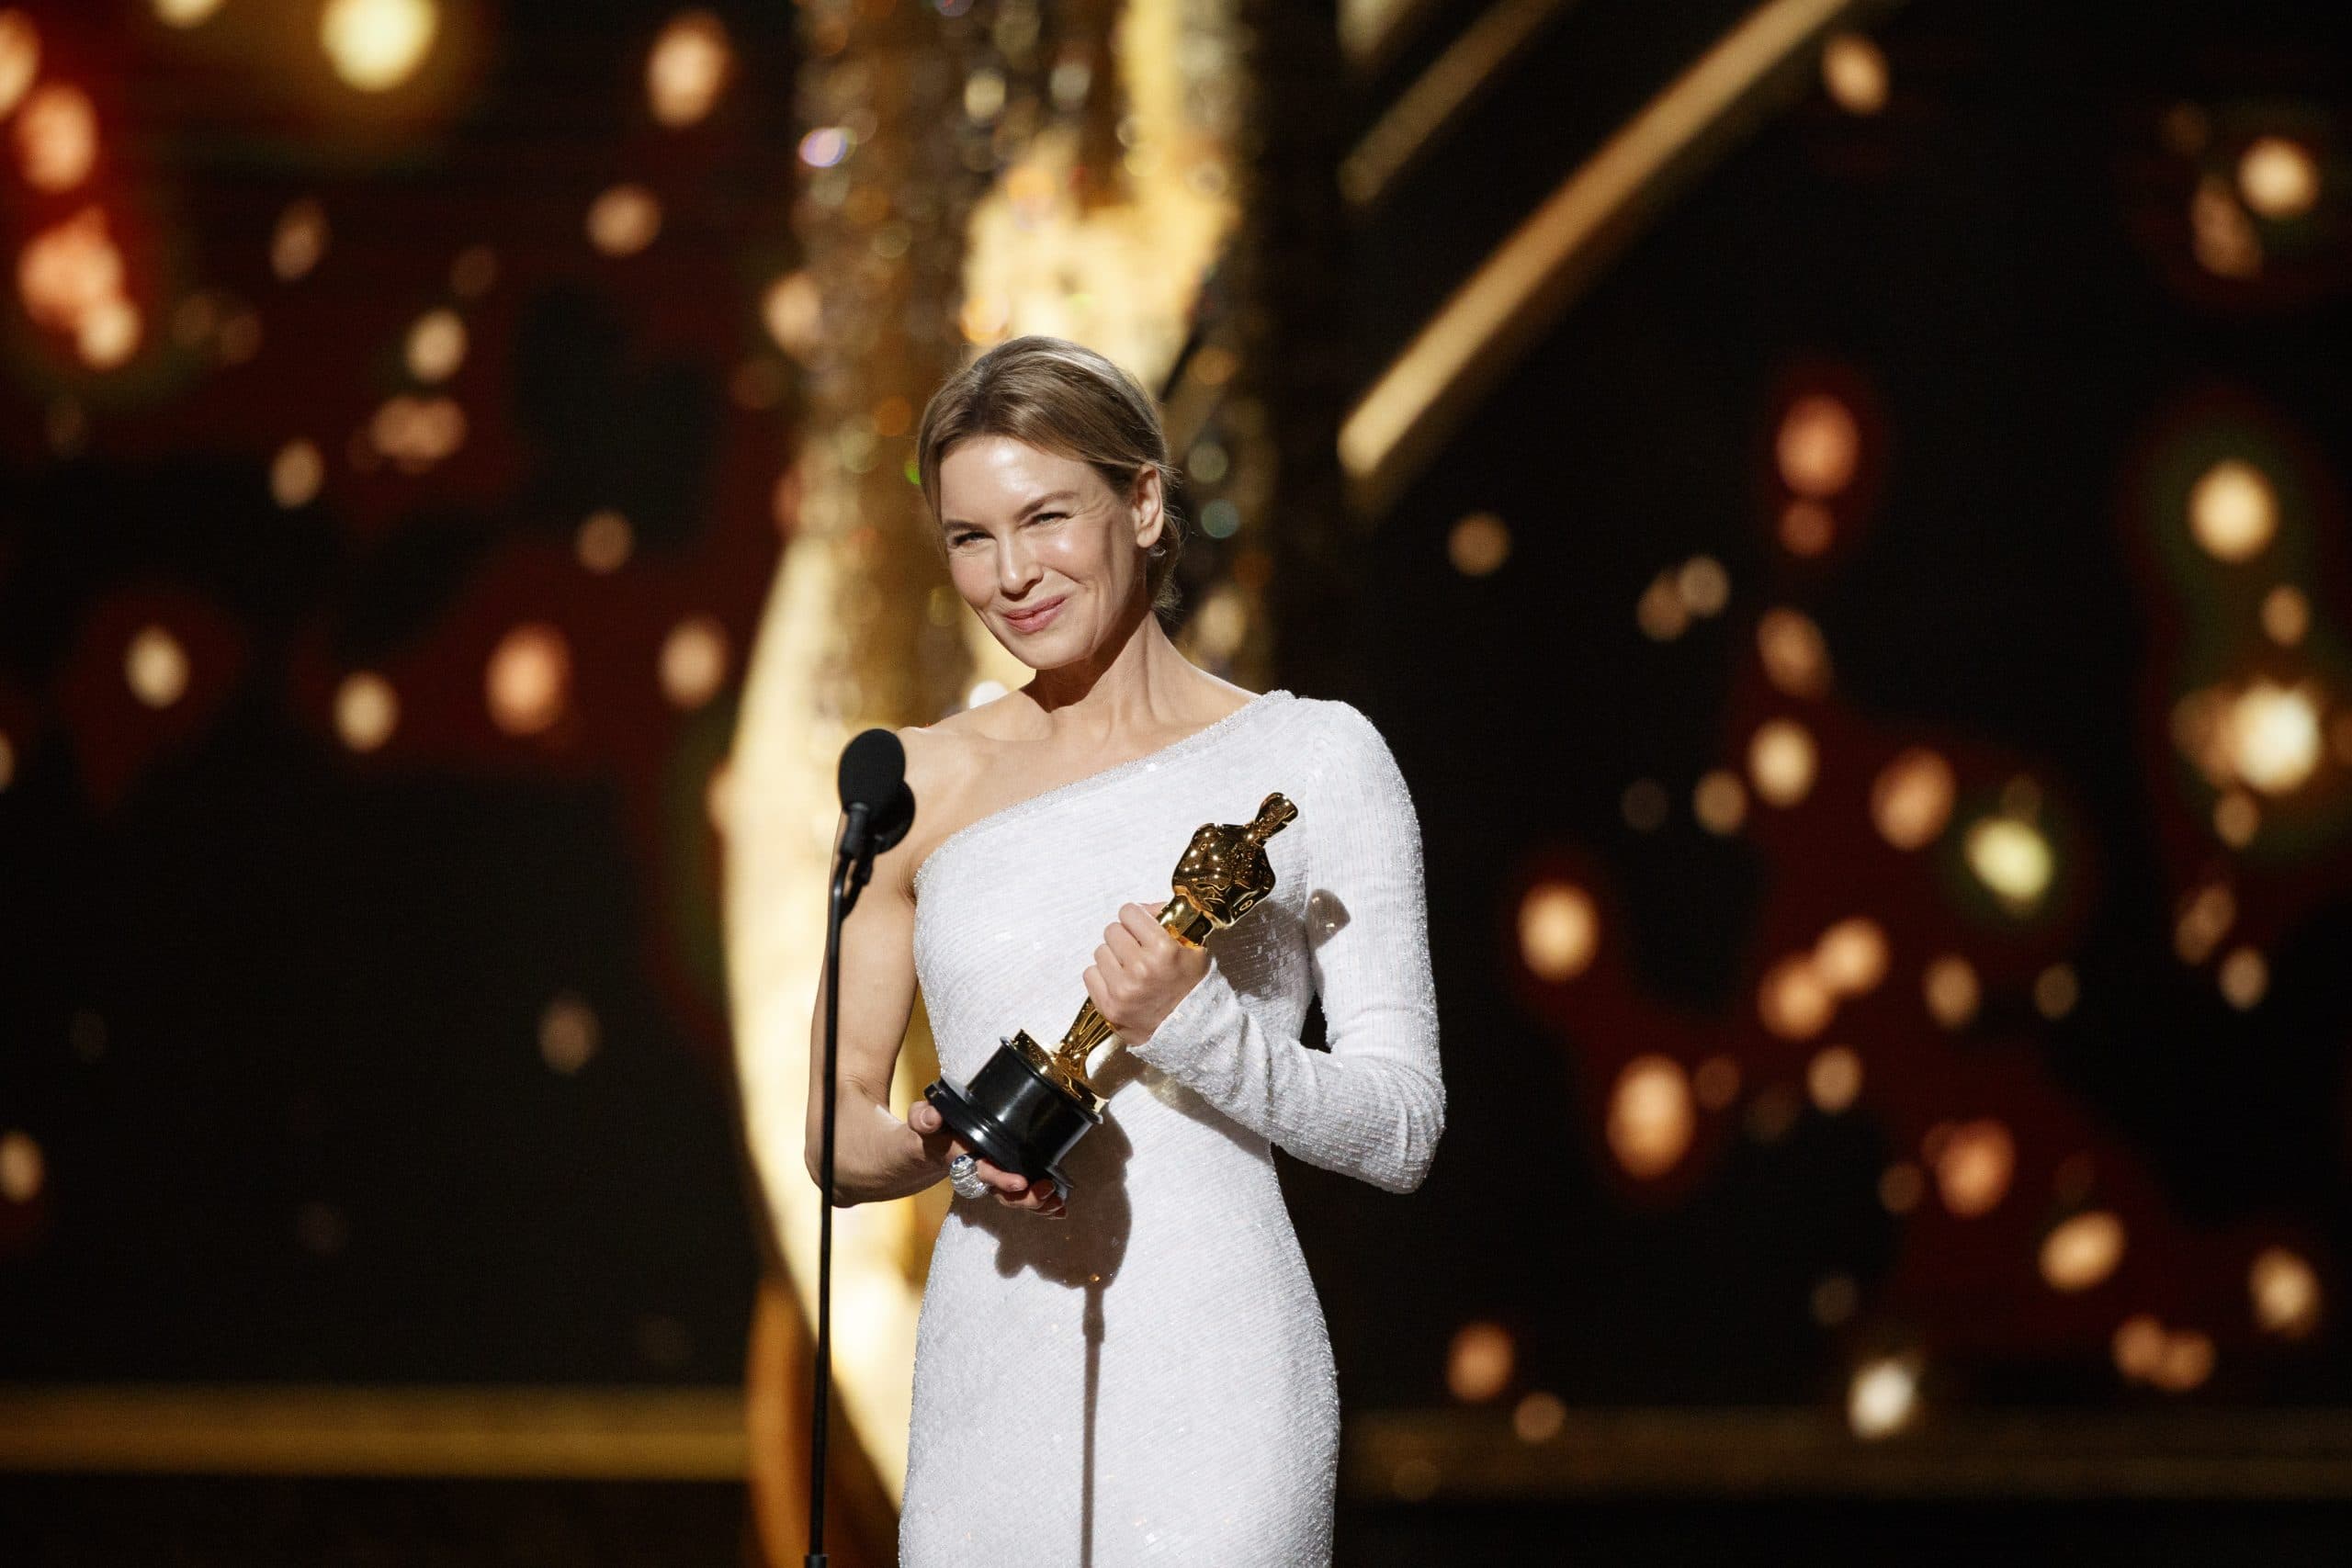 THE OSCARS® - The 92nd Oscars® broadcasts live on Sunday, Feb. 9,2020 at the Dolby Theatre® at Hollywood &amp; Highland Center® in Hollywood and will be televised live on The ABC Television Network at 8:00 p.m. EST/5:00 p.m. PST. 
(CRAIG SJODIN via Getty Images)
RENEE ZELLWEGER